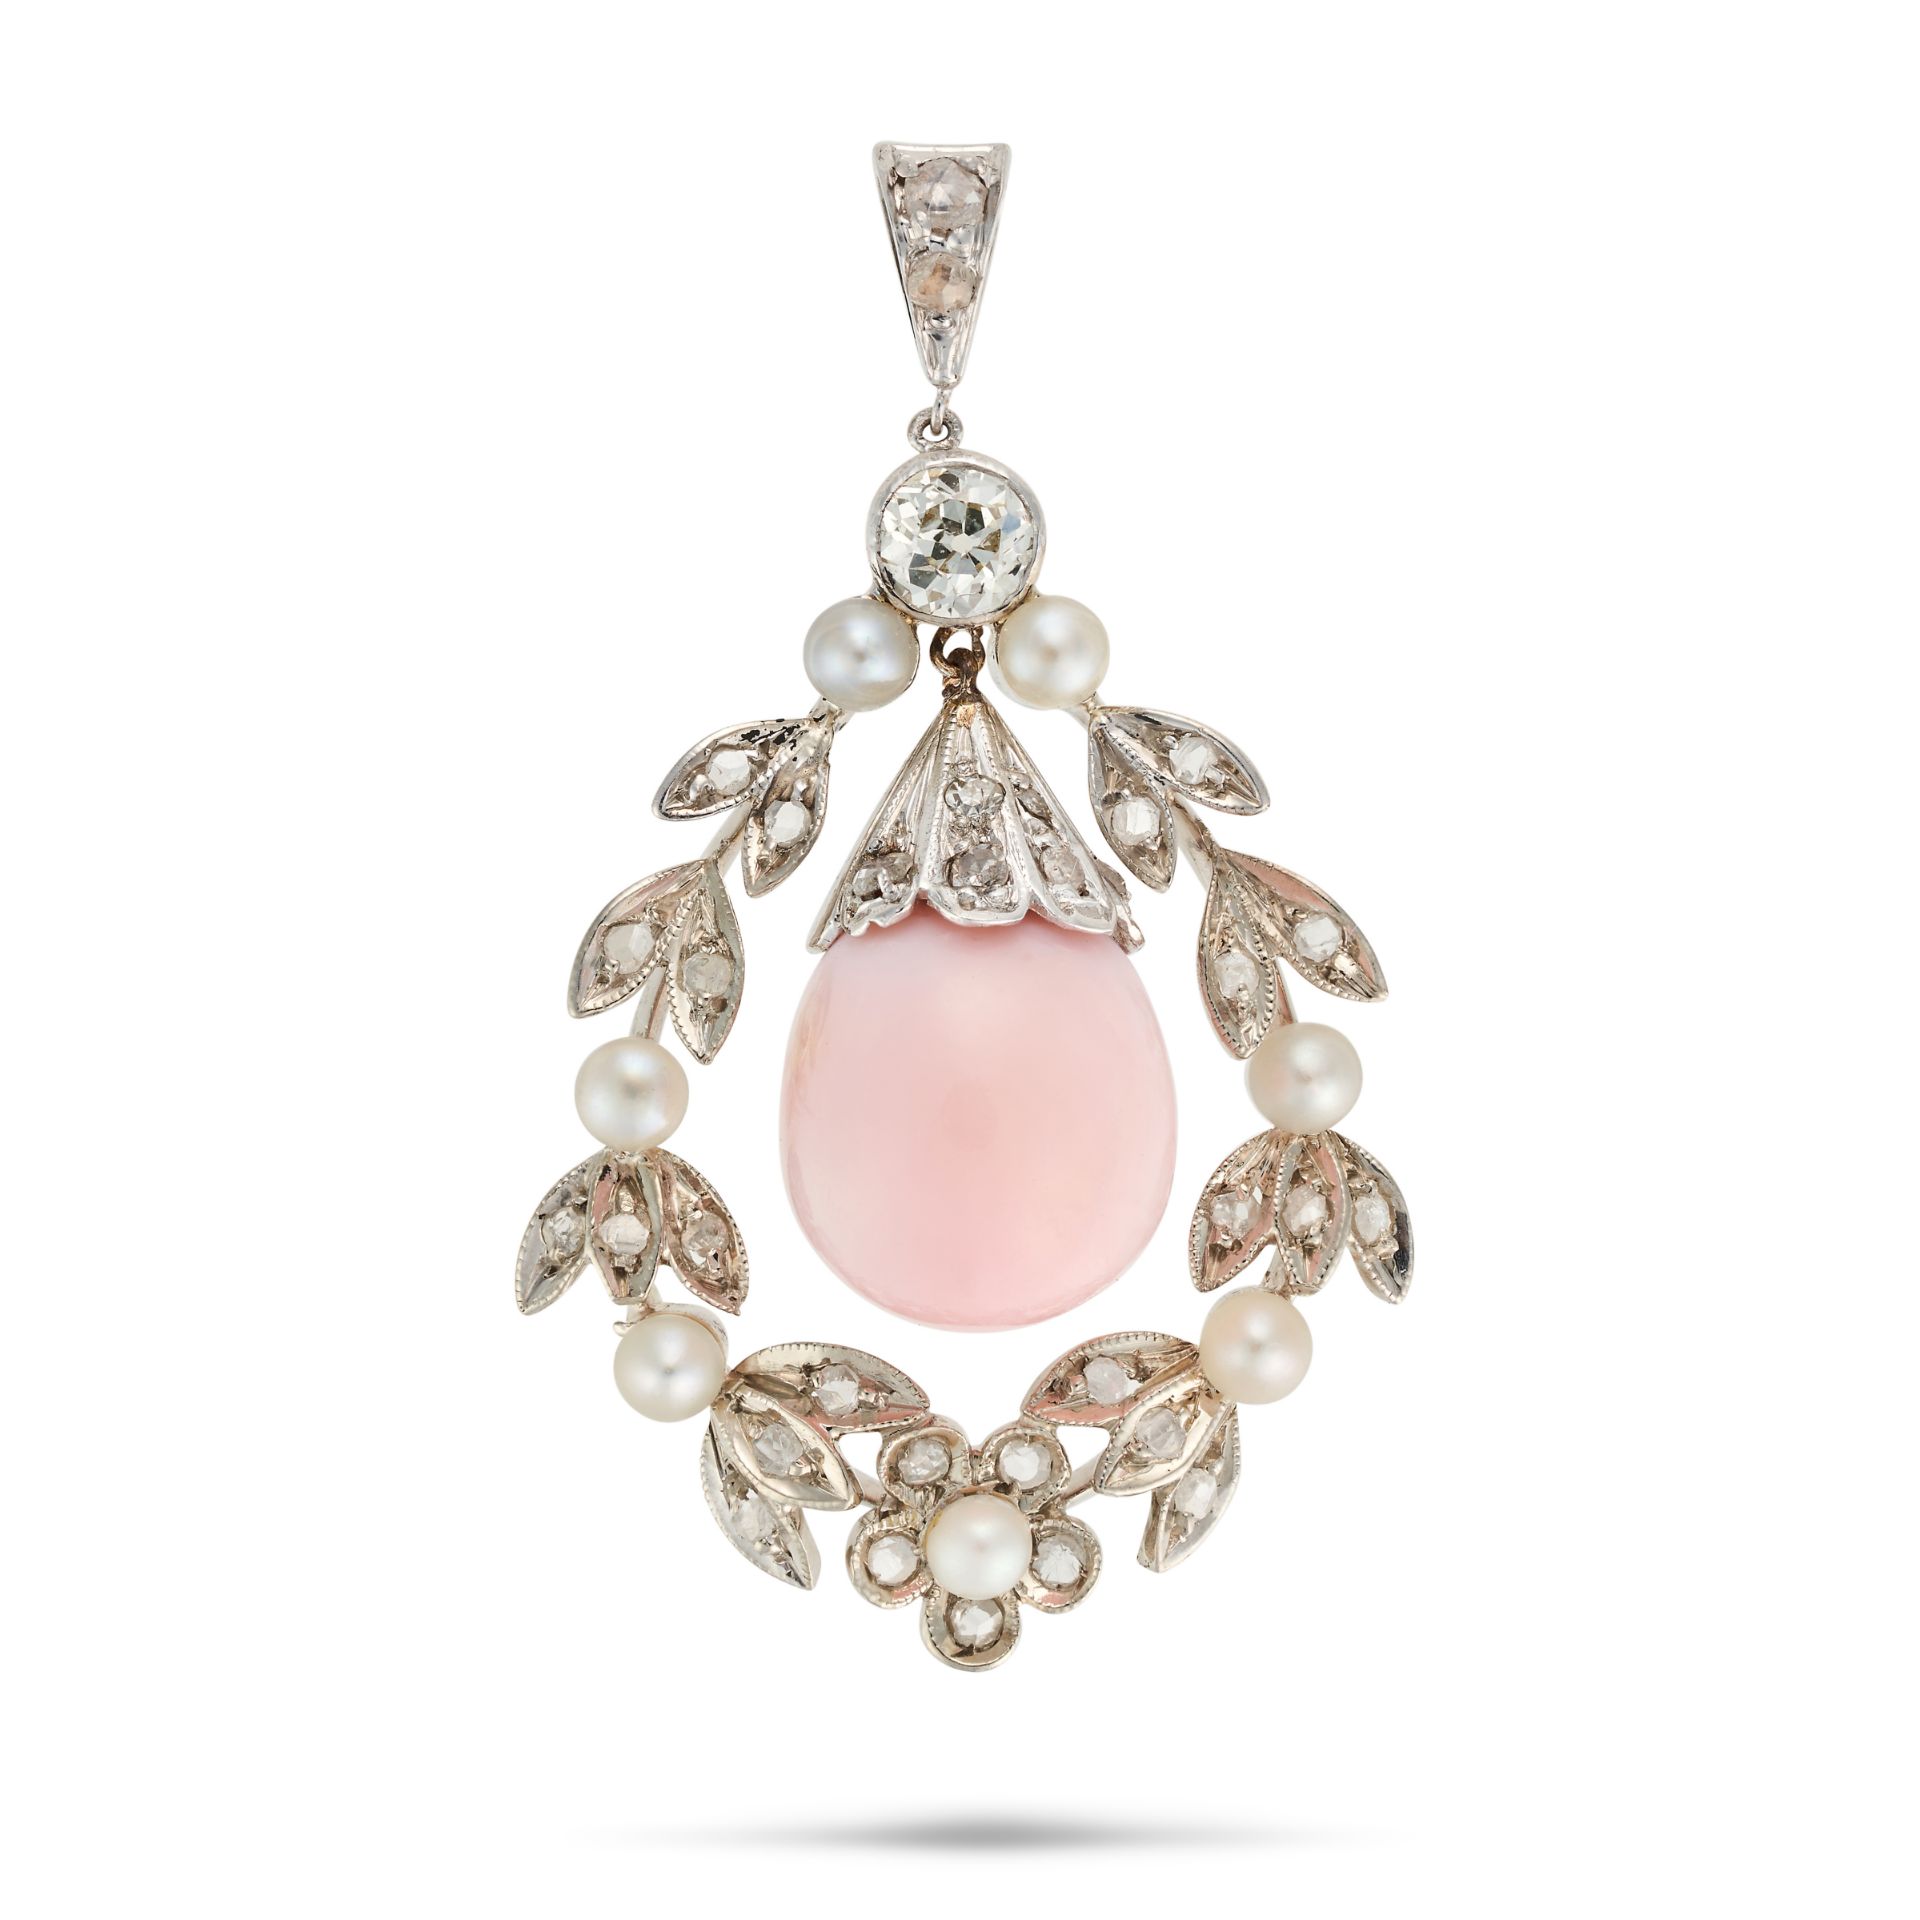 A CONCH PEARL AND DIAMOND PENDANT the pendant designed as a laurel wreath set with old and rose c...